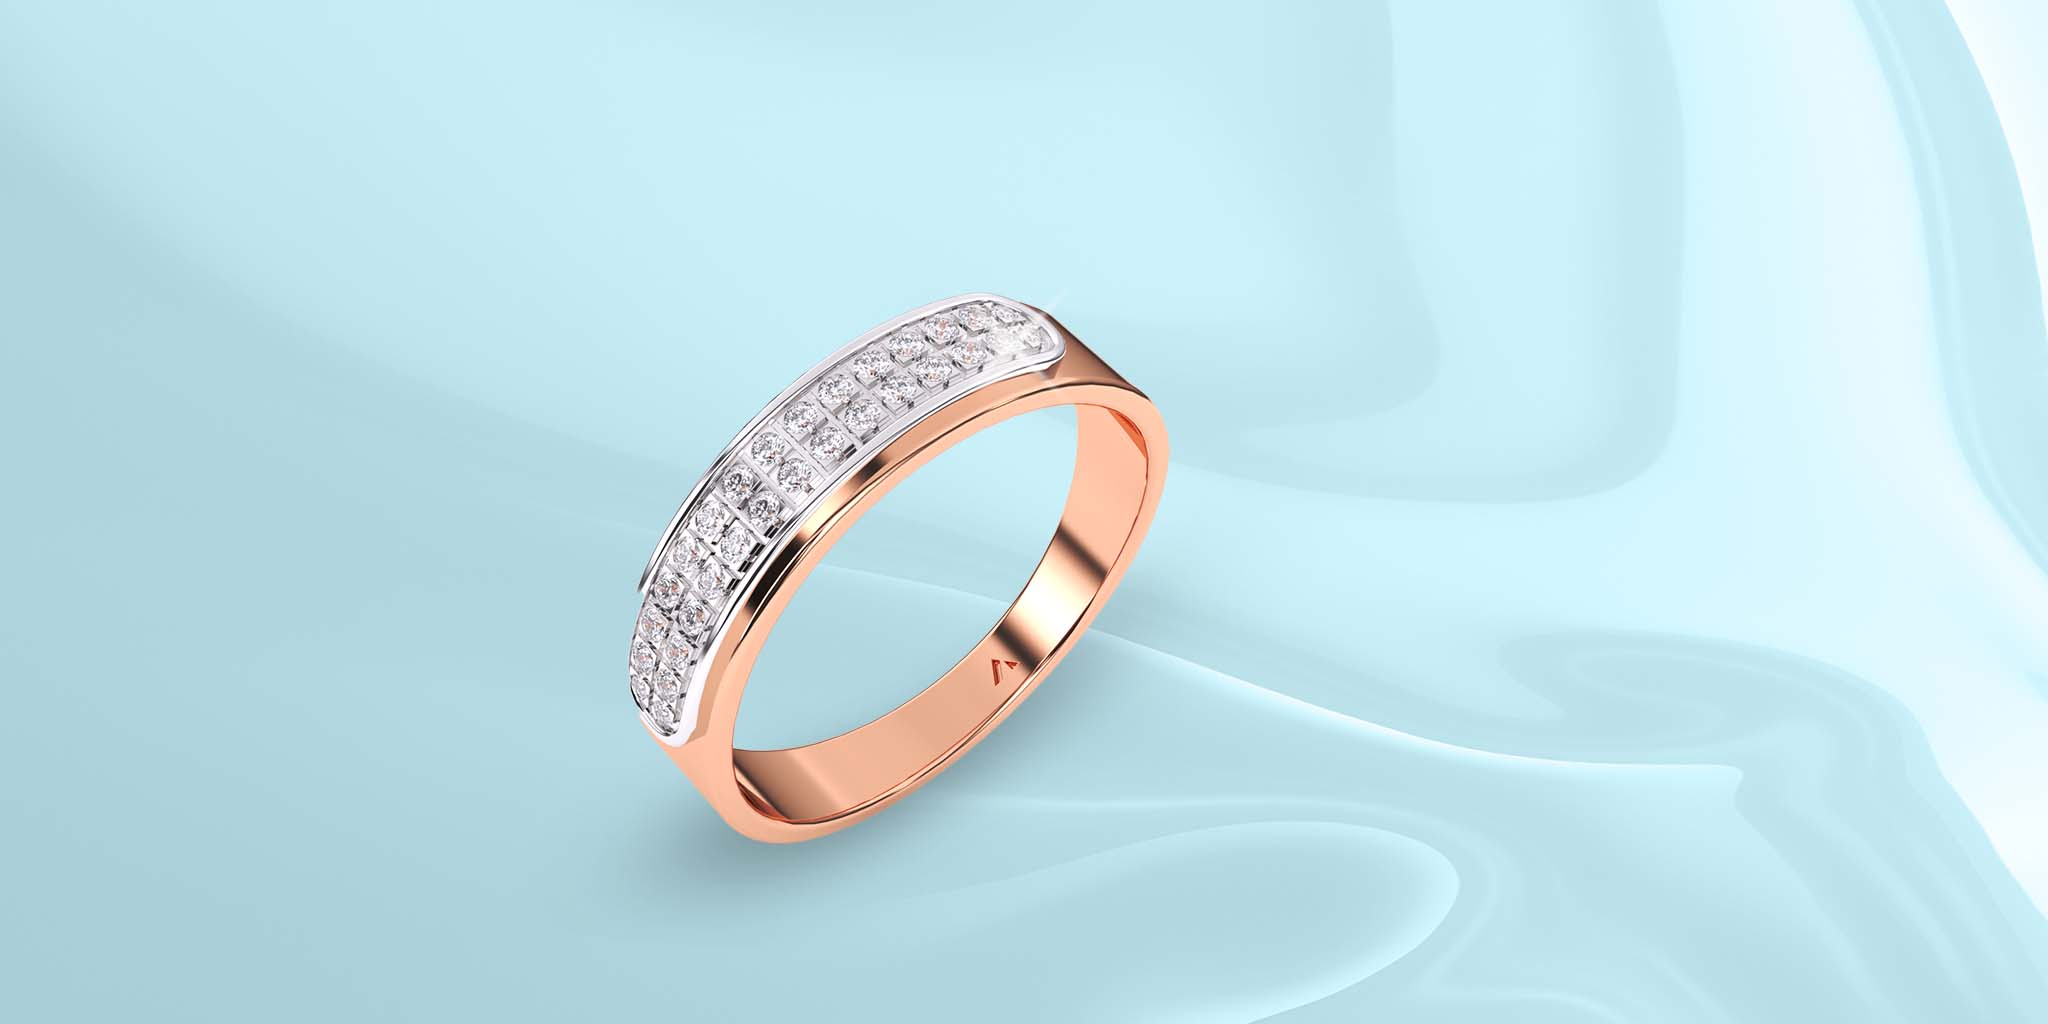 Top 10 Lab Grown Diamond Rings for Women by This season